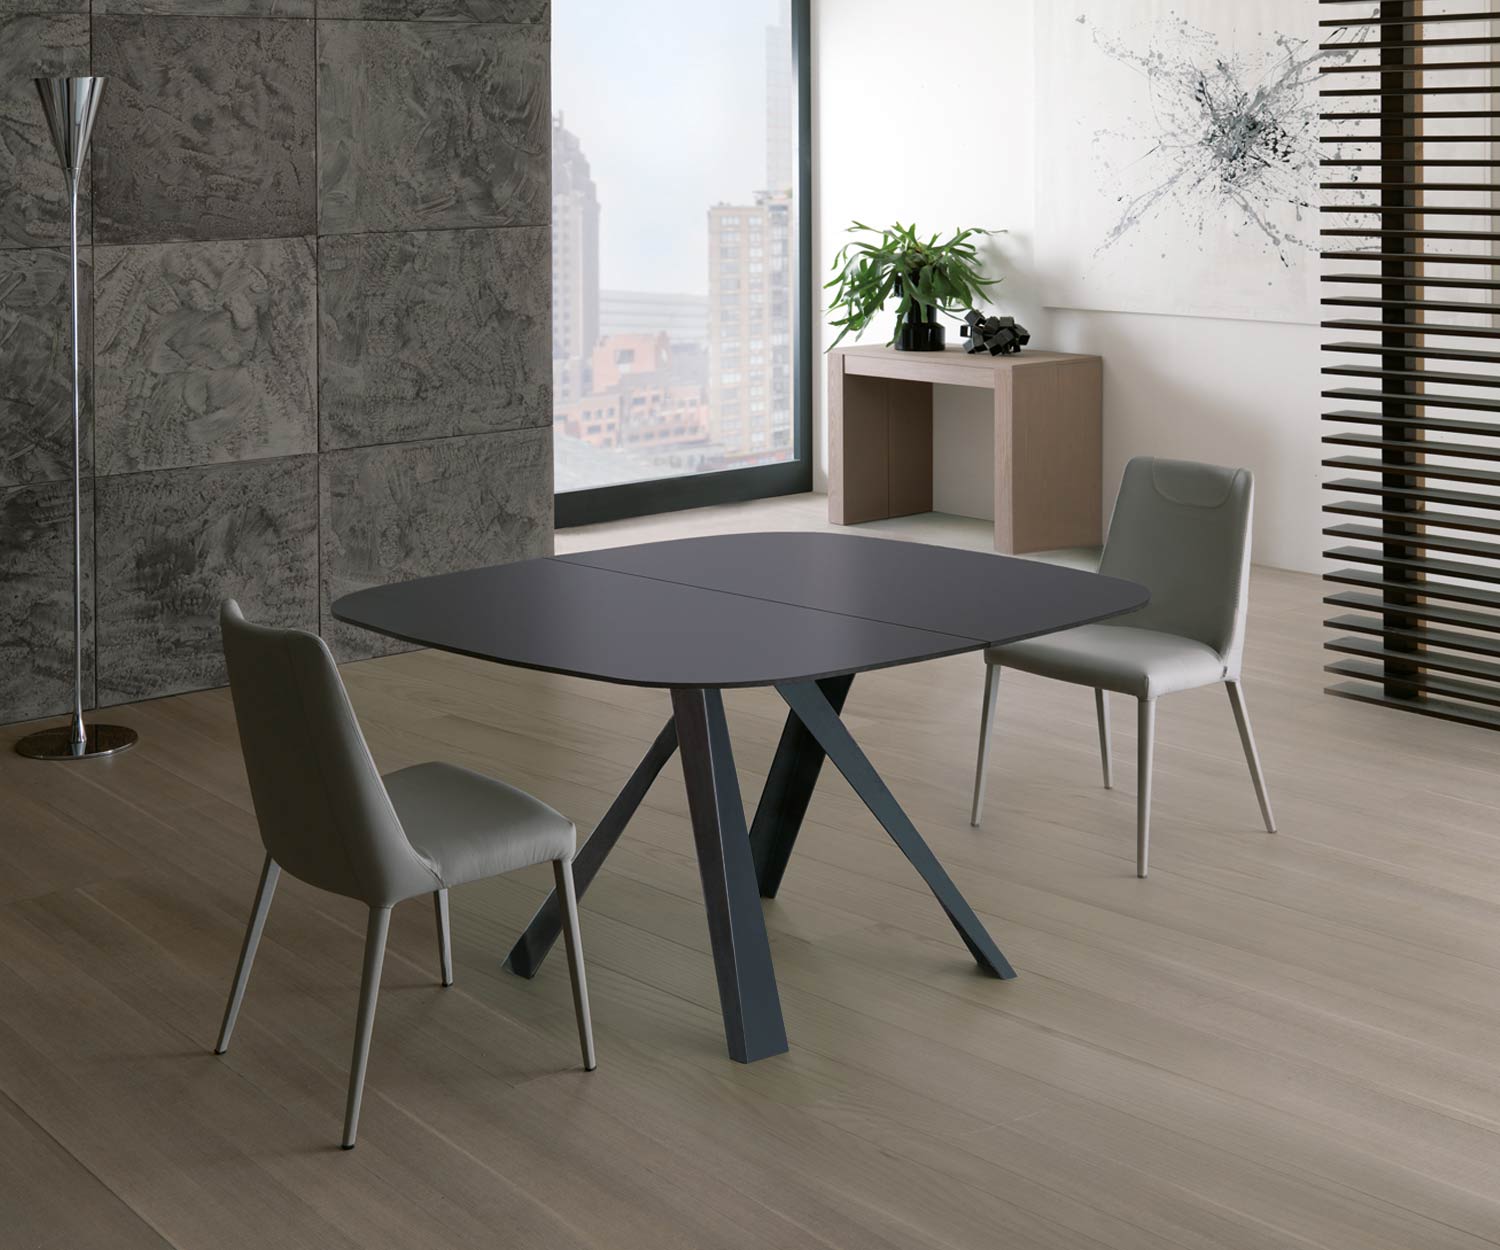 Ozzio Bombo extendable dining table T246 square table with round corners